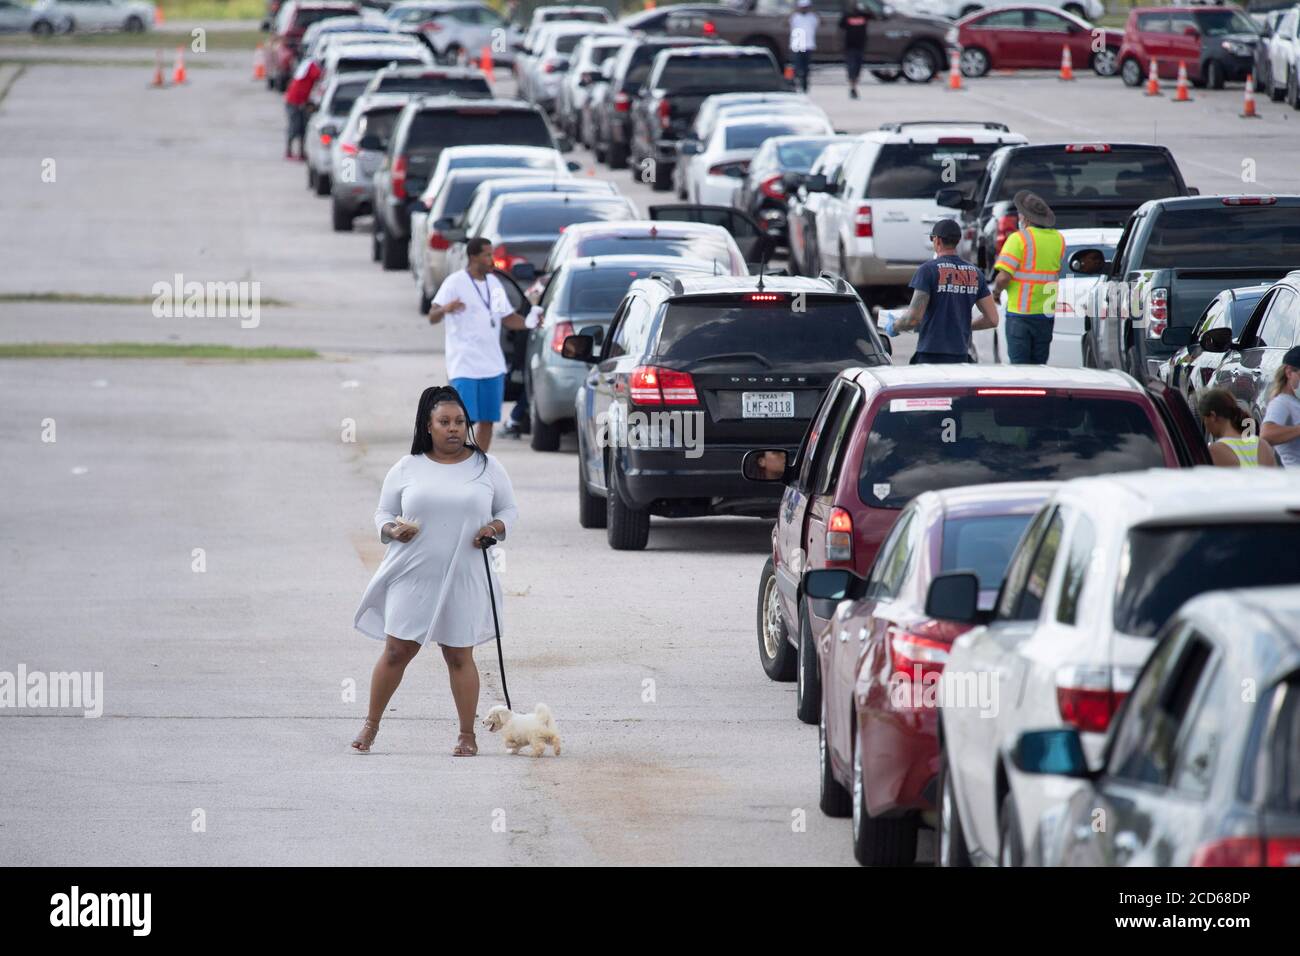 Austin, TX USA August 26, 2020: Hundreds of cars from coastal east Texas and southwest Louisiana wait in line at a Hurricane Laura evacuation center at the Circuit of the Americas race track parking areas. After spending hours in her car, this woman walks her dog. Early-arriving drivers received vouchers for hotel rooms. Once those ran out, drivers were directed to other evacuation centers in Waco and Dallas. Laura is expected to make landfall overnight as a Category 4 storm and wreak havoc along the Texas and Louisiana coasts and inland. Credit: Bob Daemmrich/Alamy Live News Stock Photo